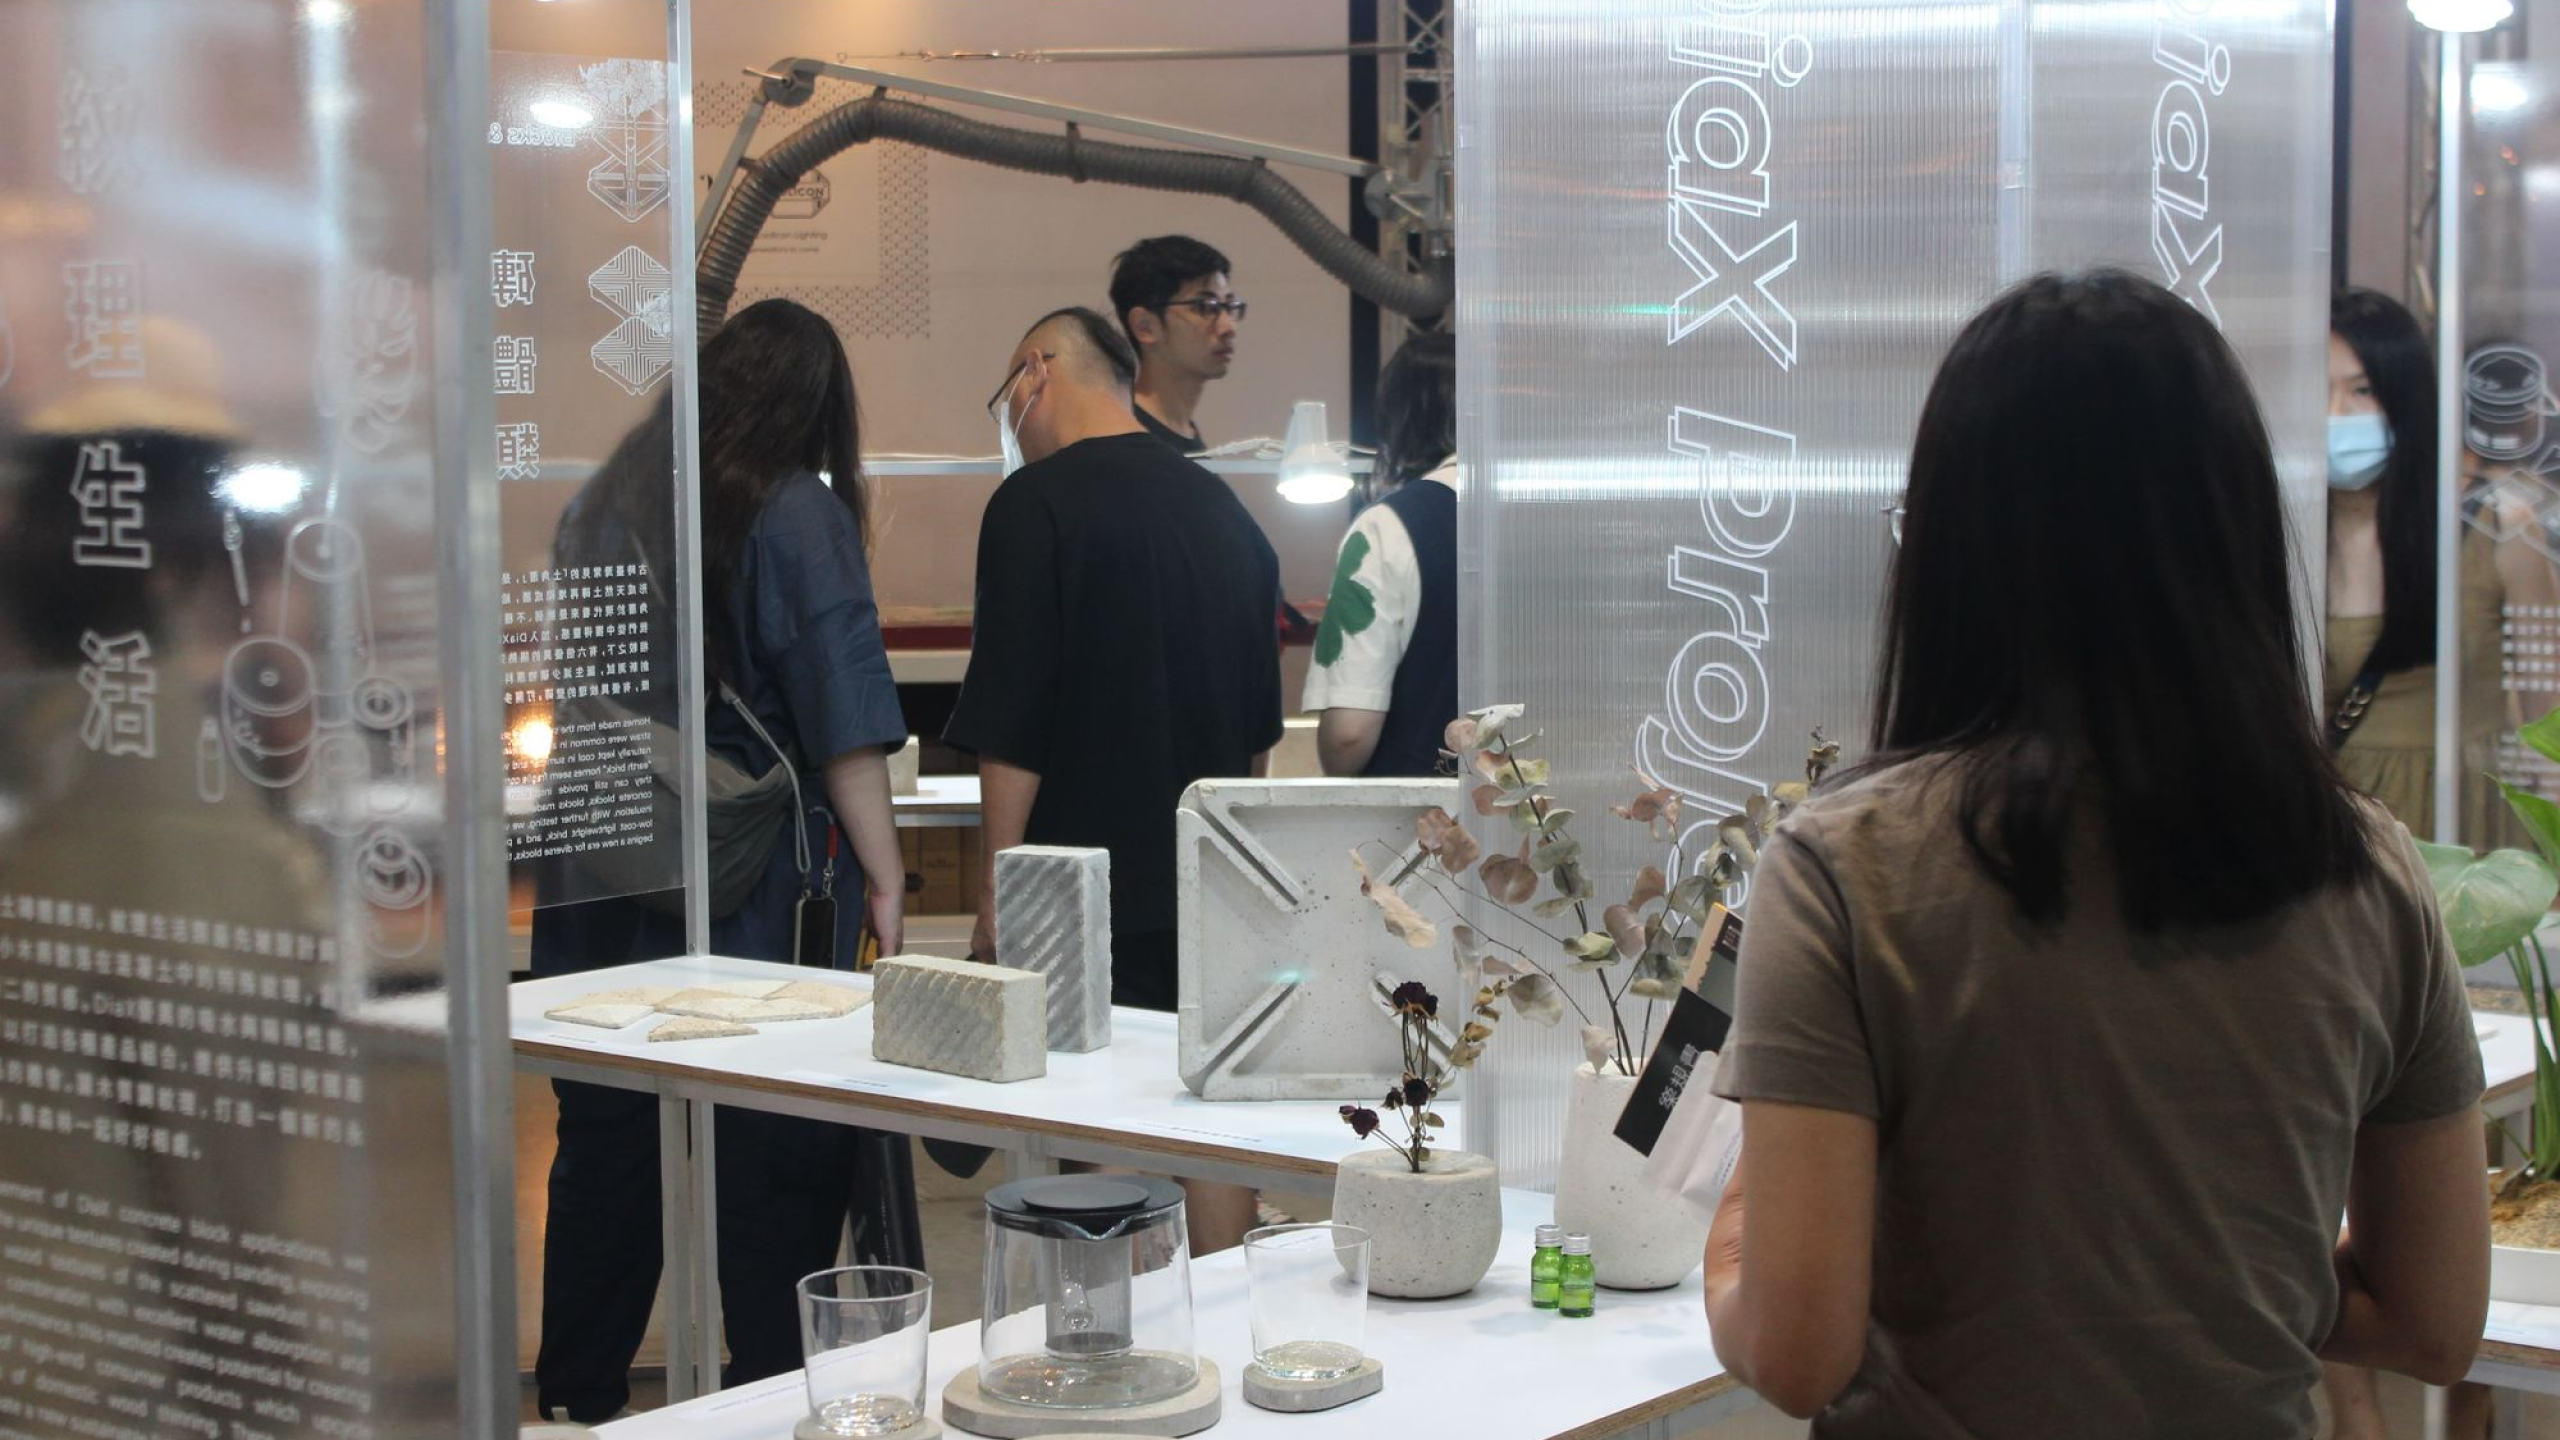 several people have their back to the camera and are touching and examining various exhibition products and prototypes